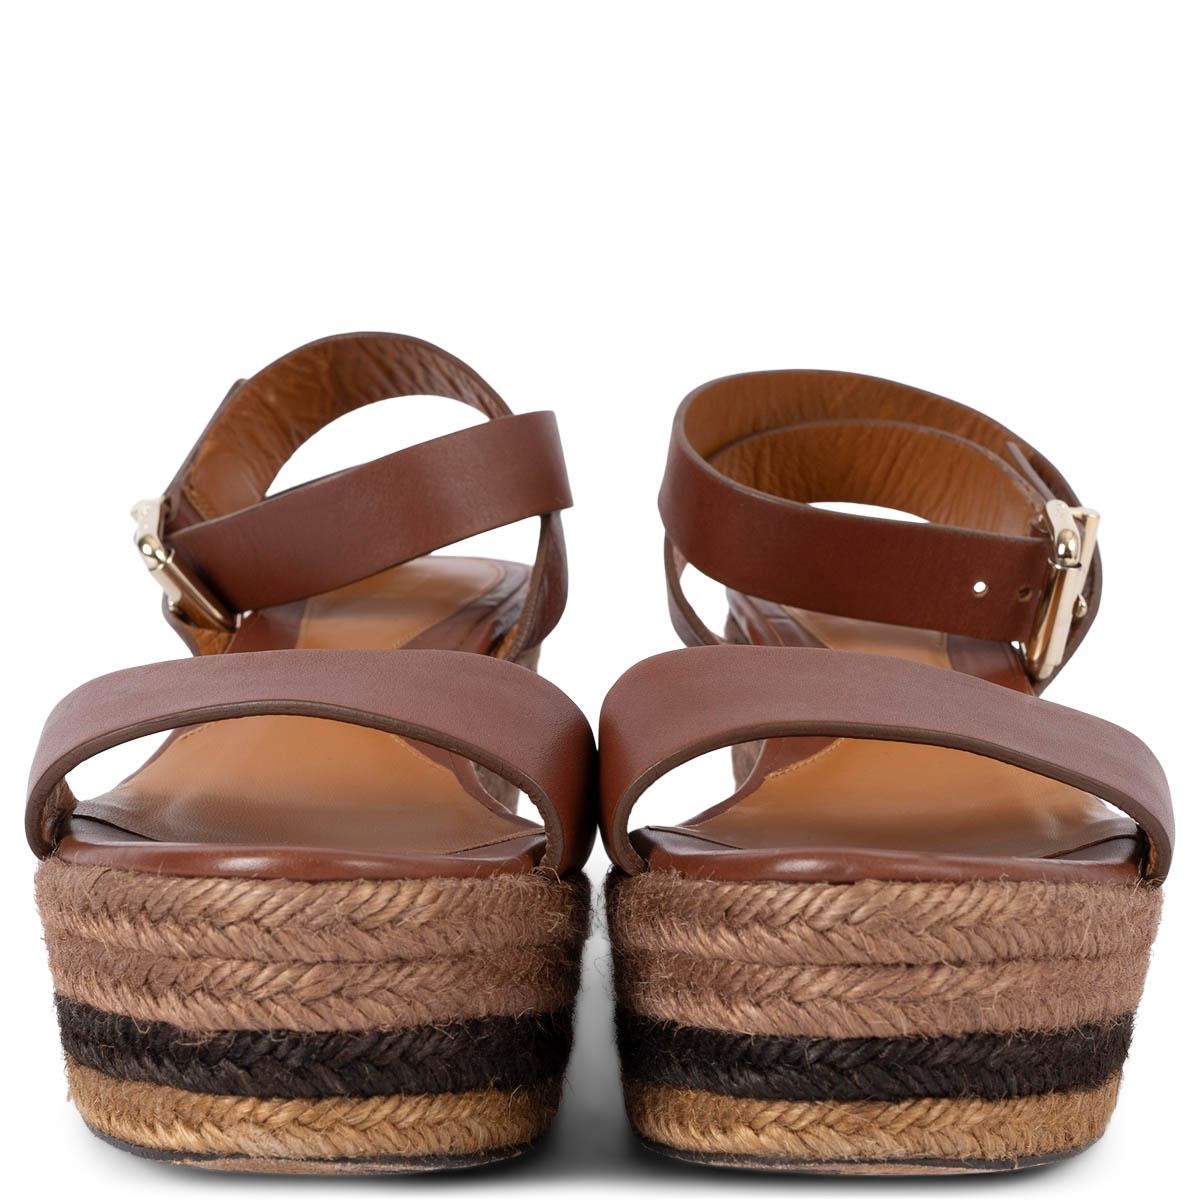 100% authentic Fendi ankle-strap espadrilles wedge sandals in brown leather with striped raffia sole and gold-tone buckle closure. Have been worn and are in excellent condition. 

Measurements
Imprinted Size	41
Shoe Size	41
Inside Sole	26cm